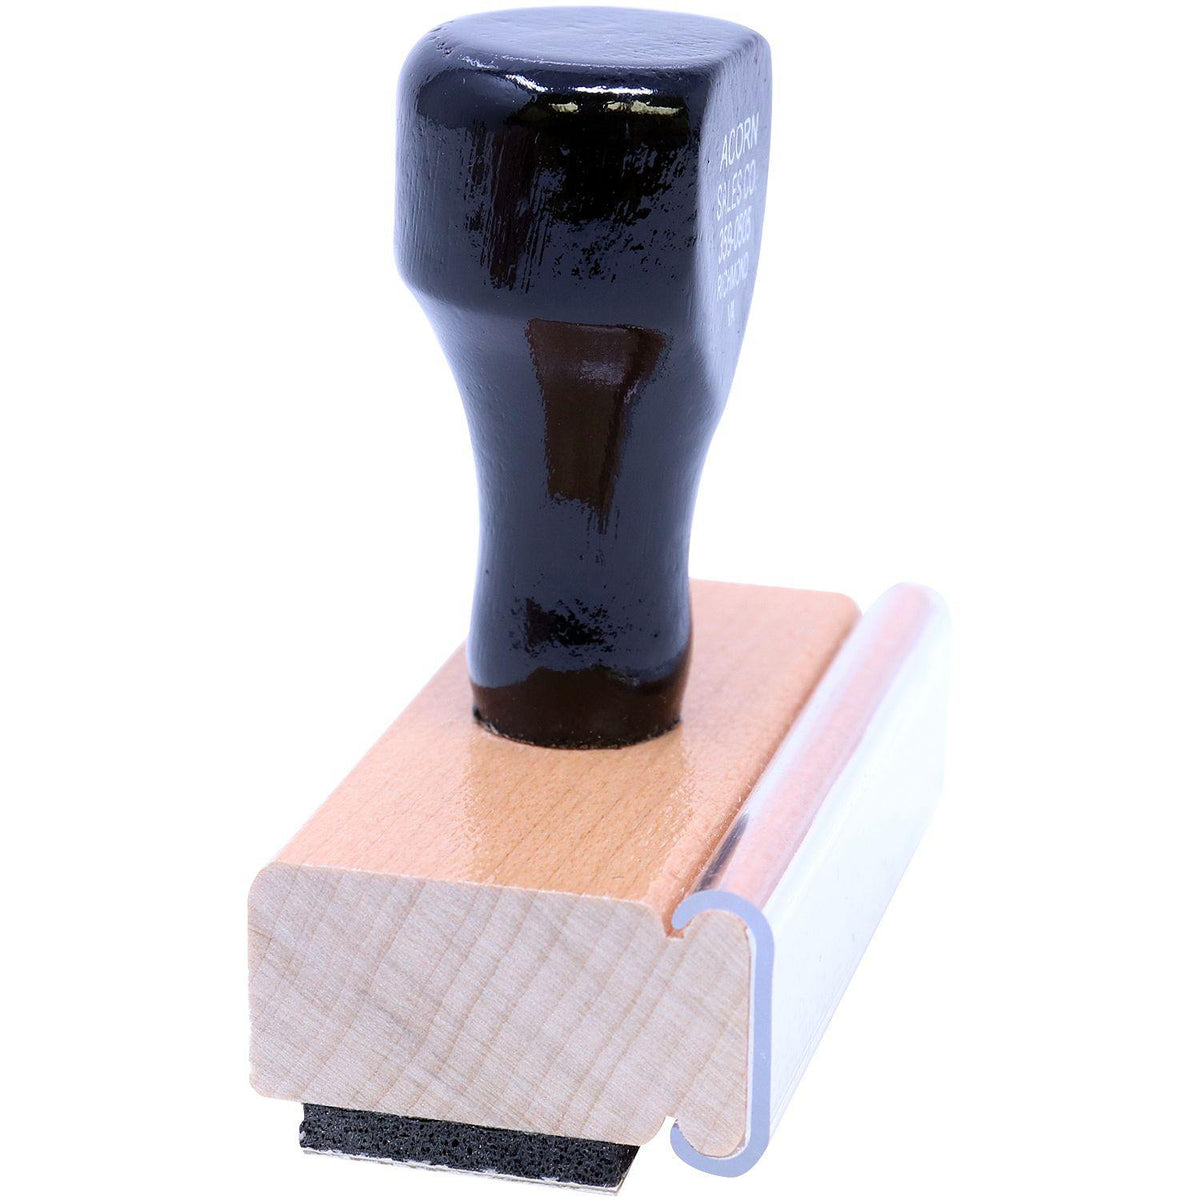 Side View of Large Important Rubber Stamp at an Angle